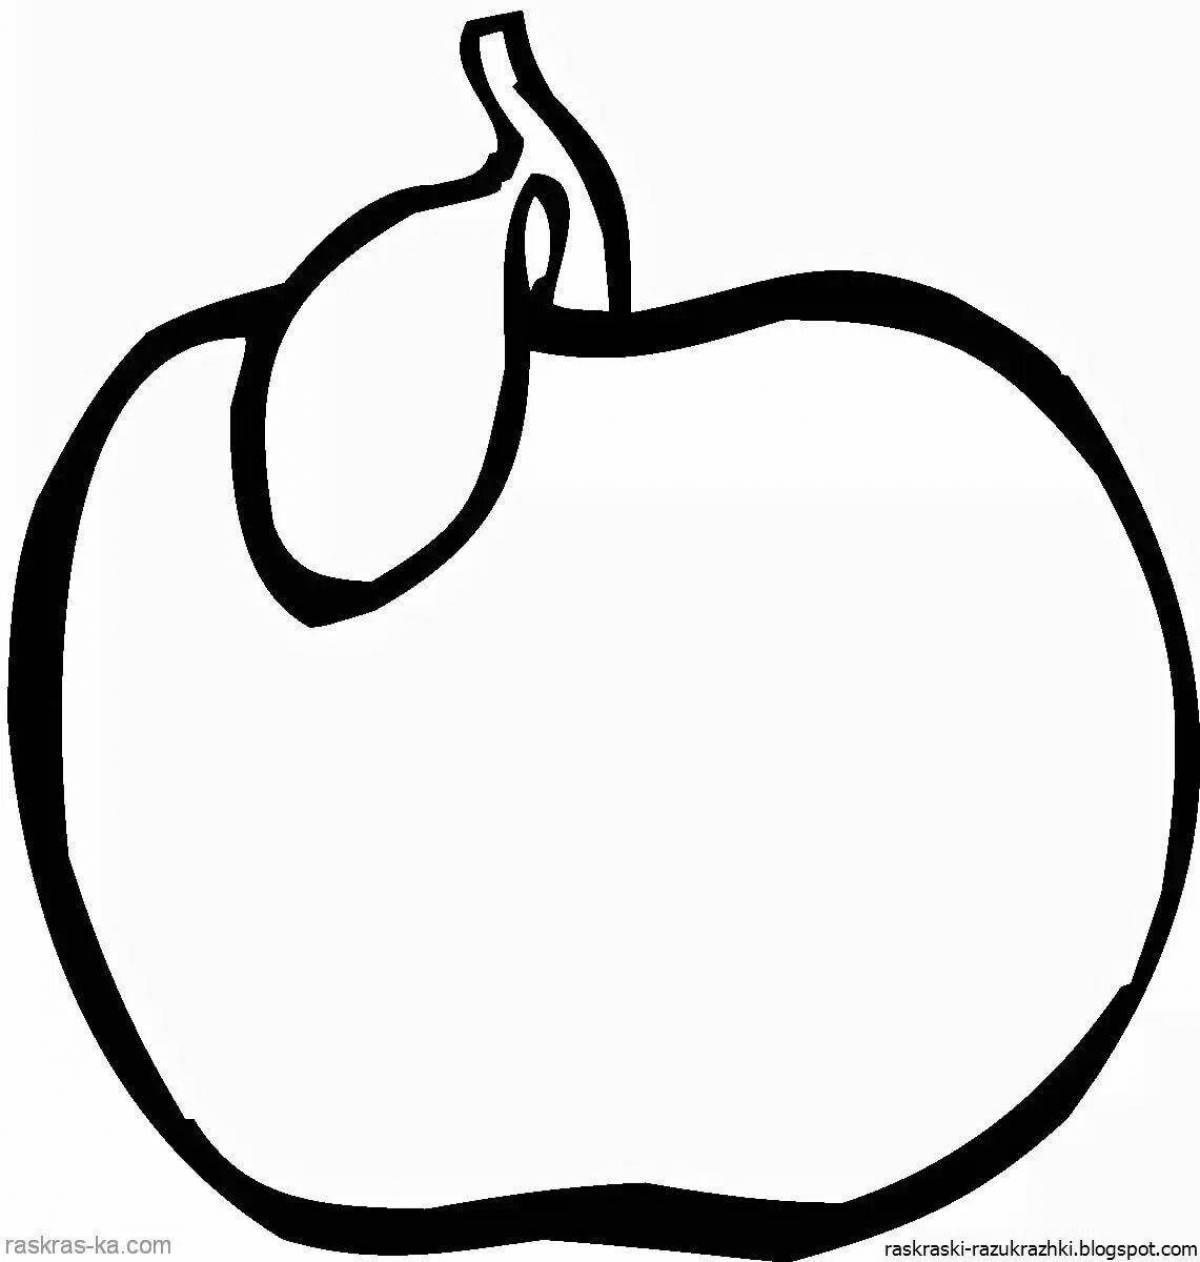 Coloring apple for kids